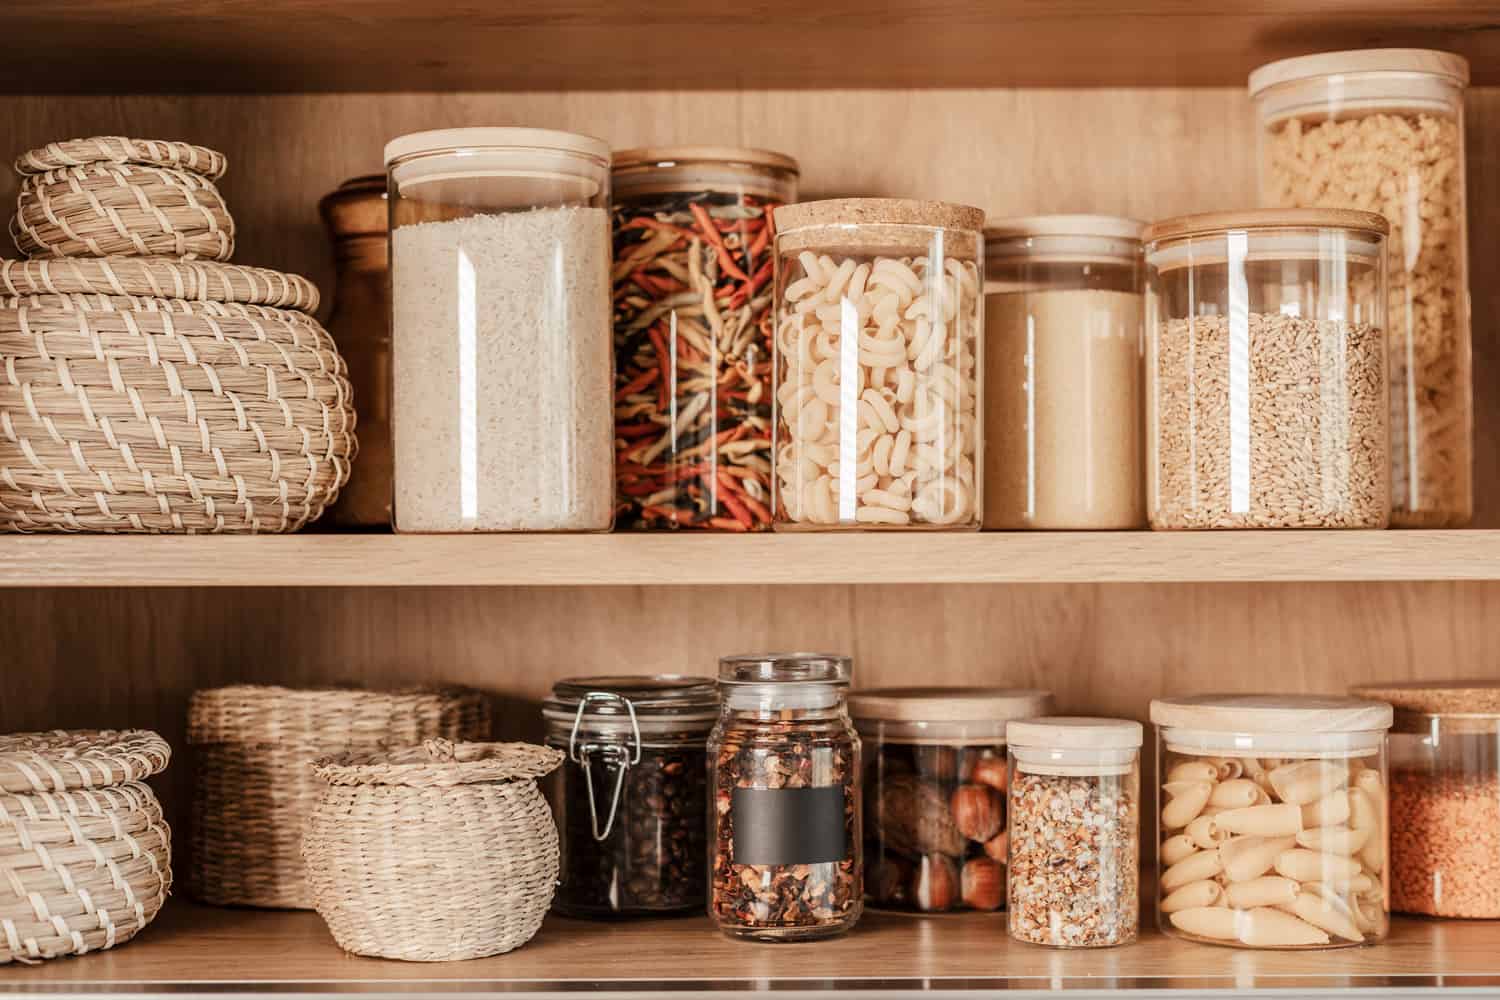 Organizing zero waste storage in the kitchen. Pasta and cereals in reusable glass containers in kitchen shelf. Sustainable lifestyle idea